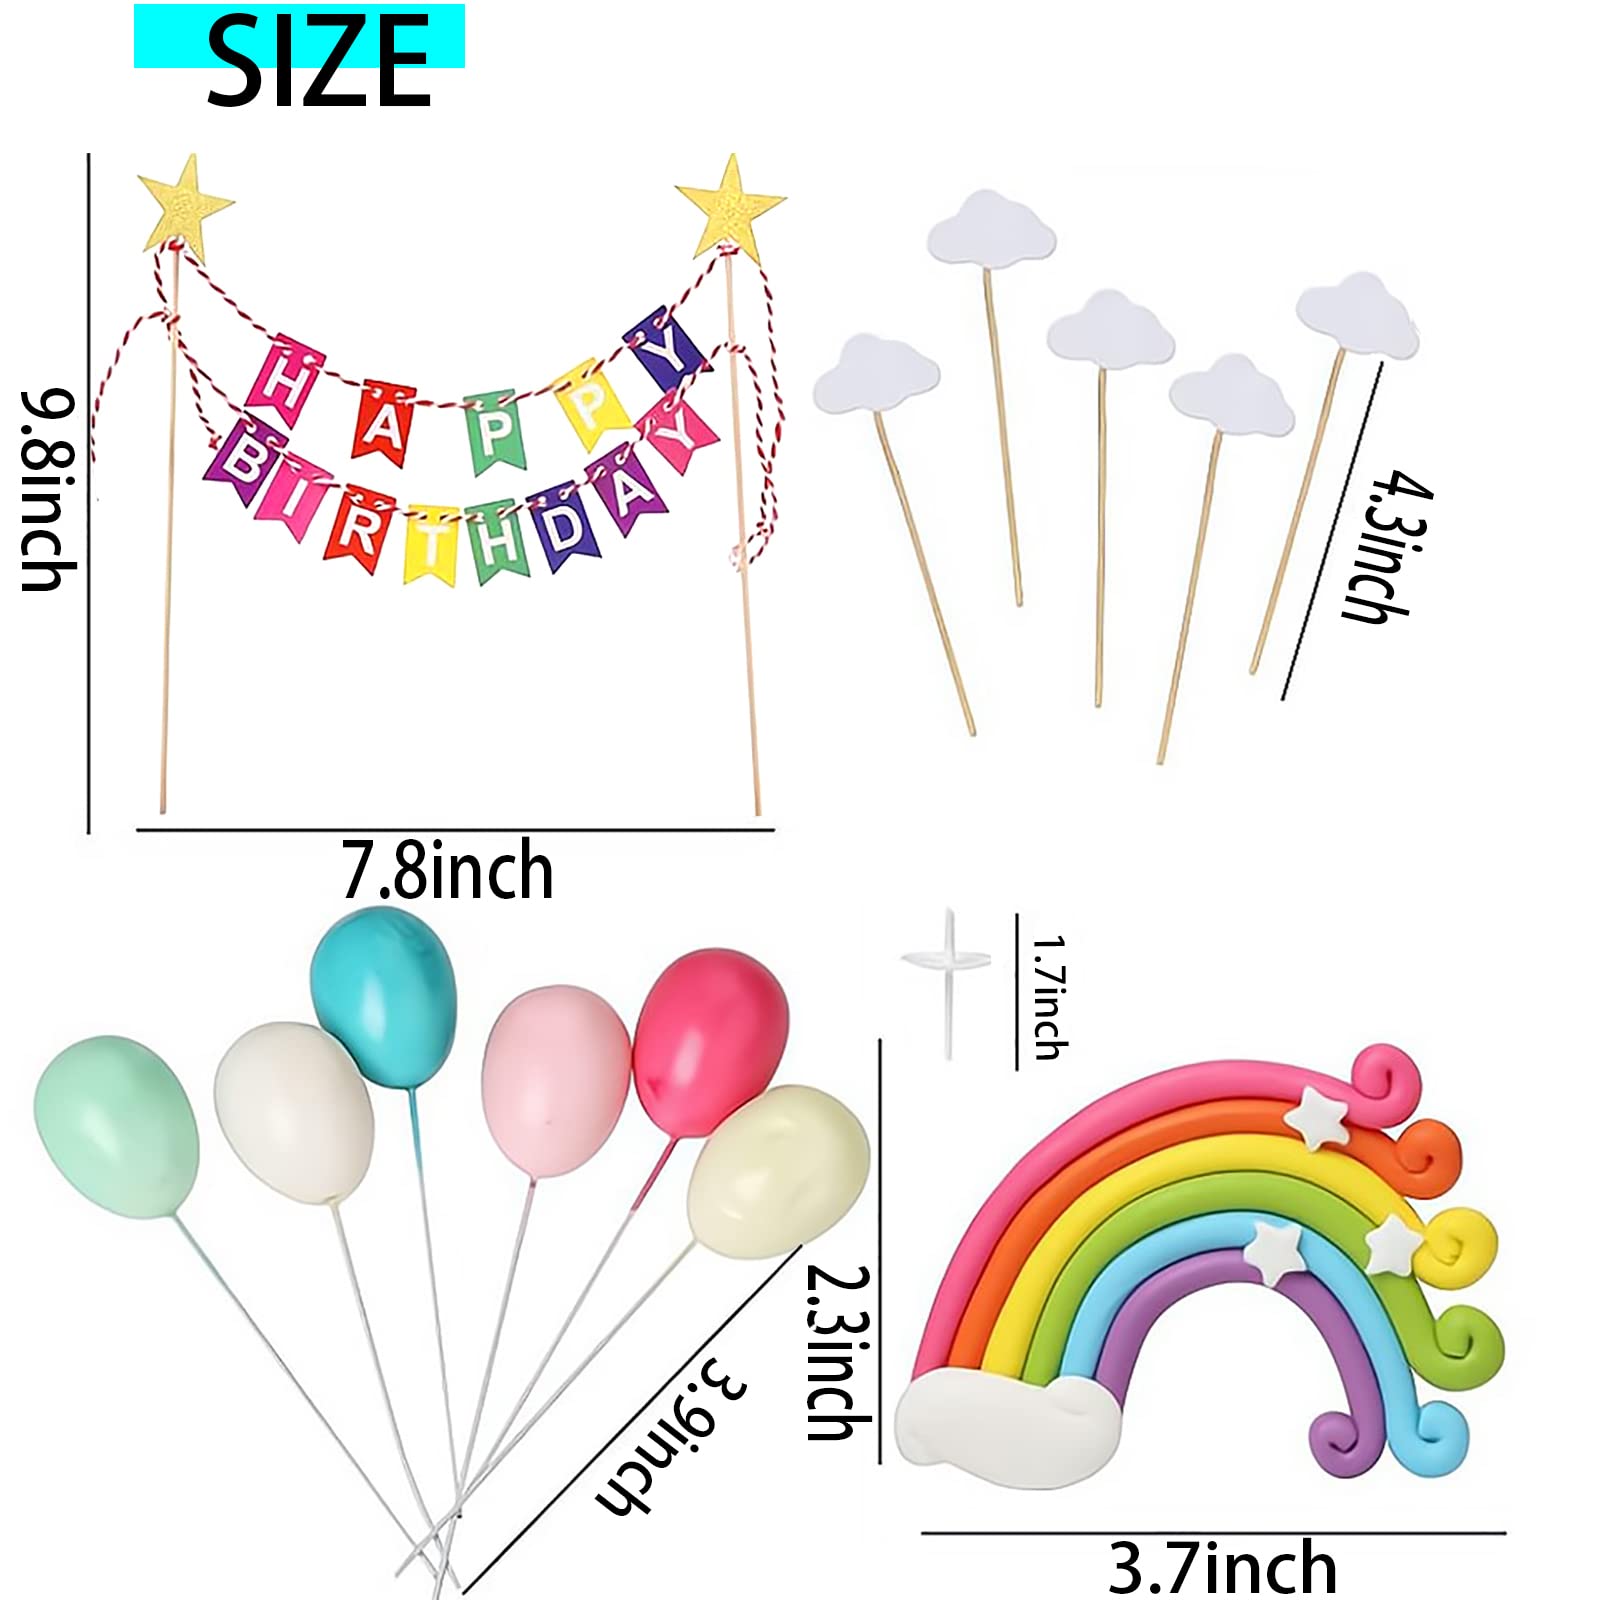 BIEUFBJI Rainbow Cake Topper, 15-Piece Cake Decoration Set, Lnclude Colorful Rainbow Clouds Balloon Stars, For Boy Girl Kid Birthday Baby Shower Party Baking Decoration Supplies